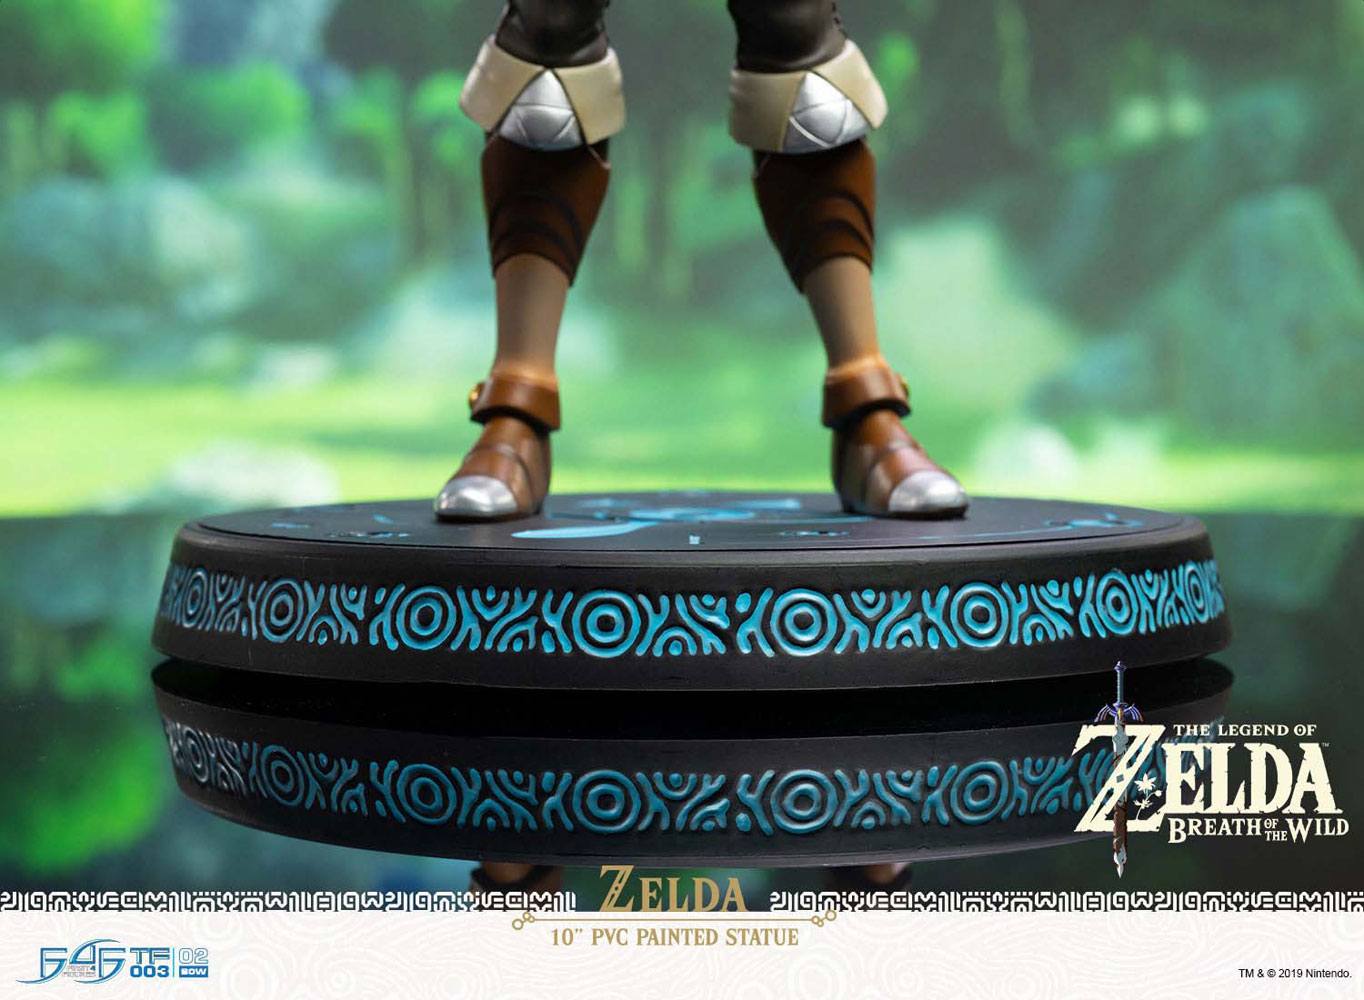 breath of the wild statue took heart container